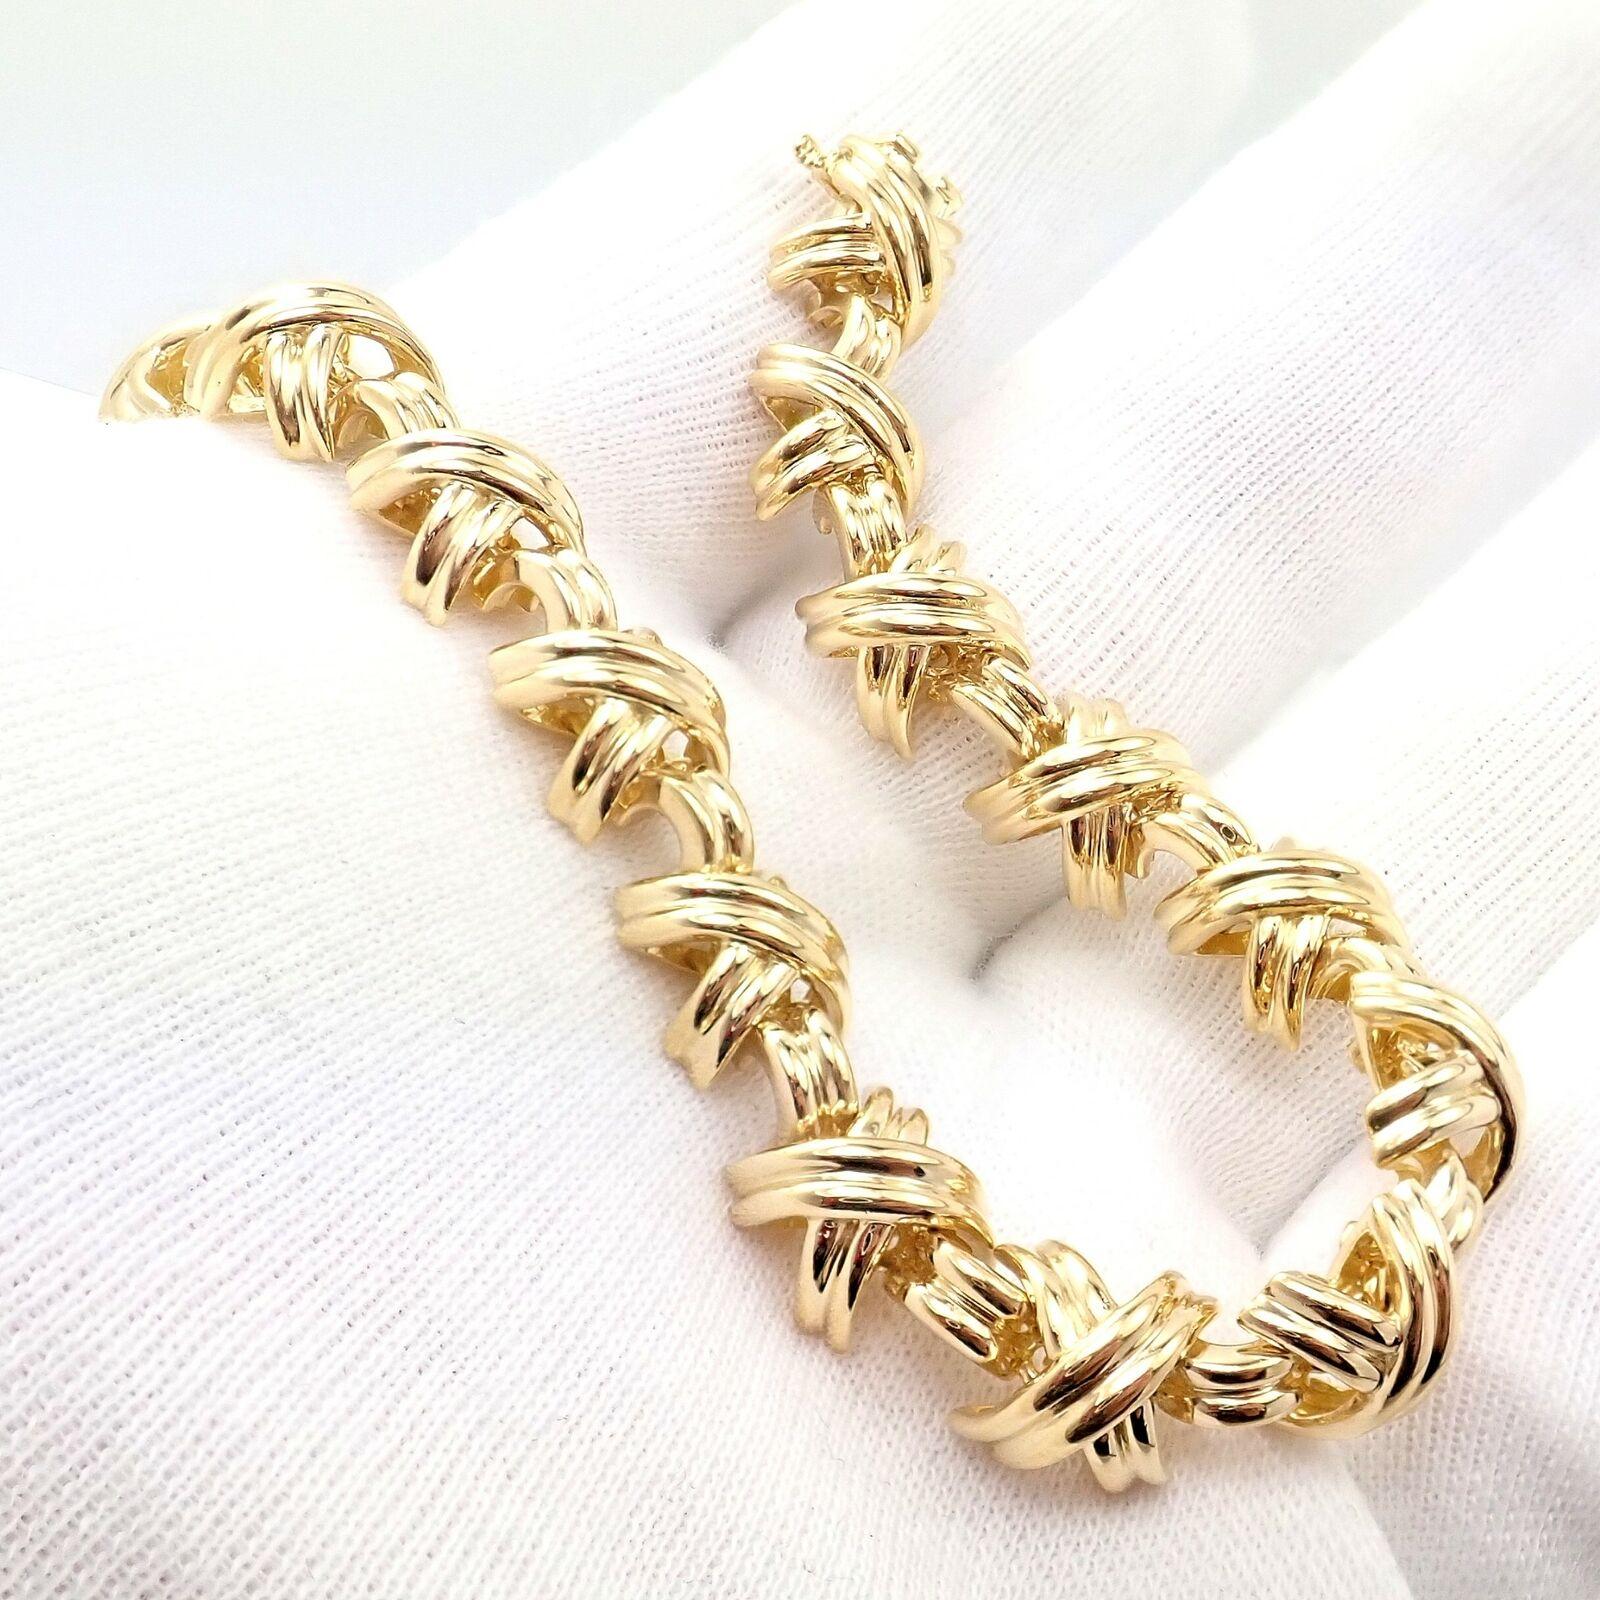 Tiffany & Co. Classic X Link Yellow Gold Bracelet In Excellent Condition For Sale In Holland, PA